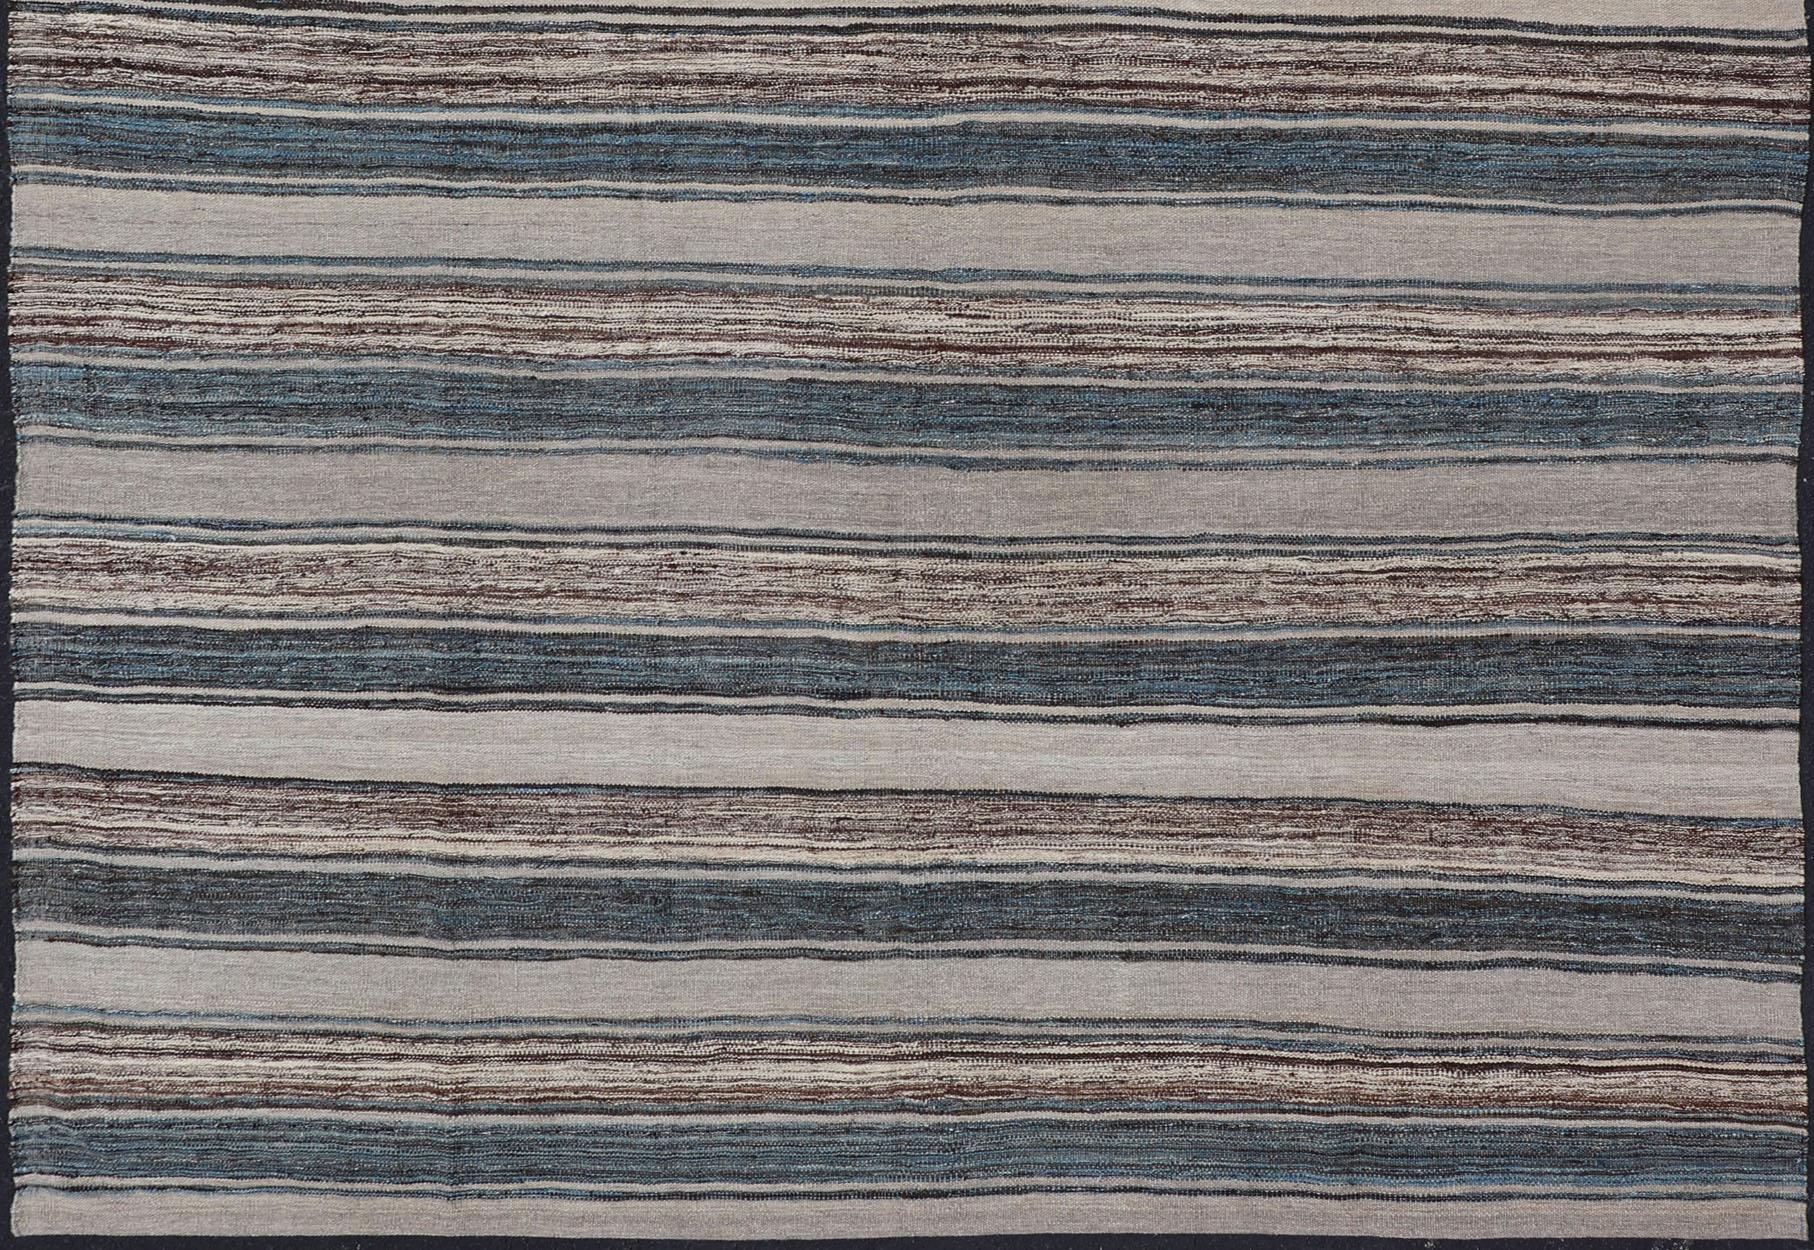 Hand-Woven Versatile and Natural Brown, Cream, and Blue Striped Flat-Weave Kilim For Sale